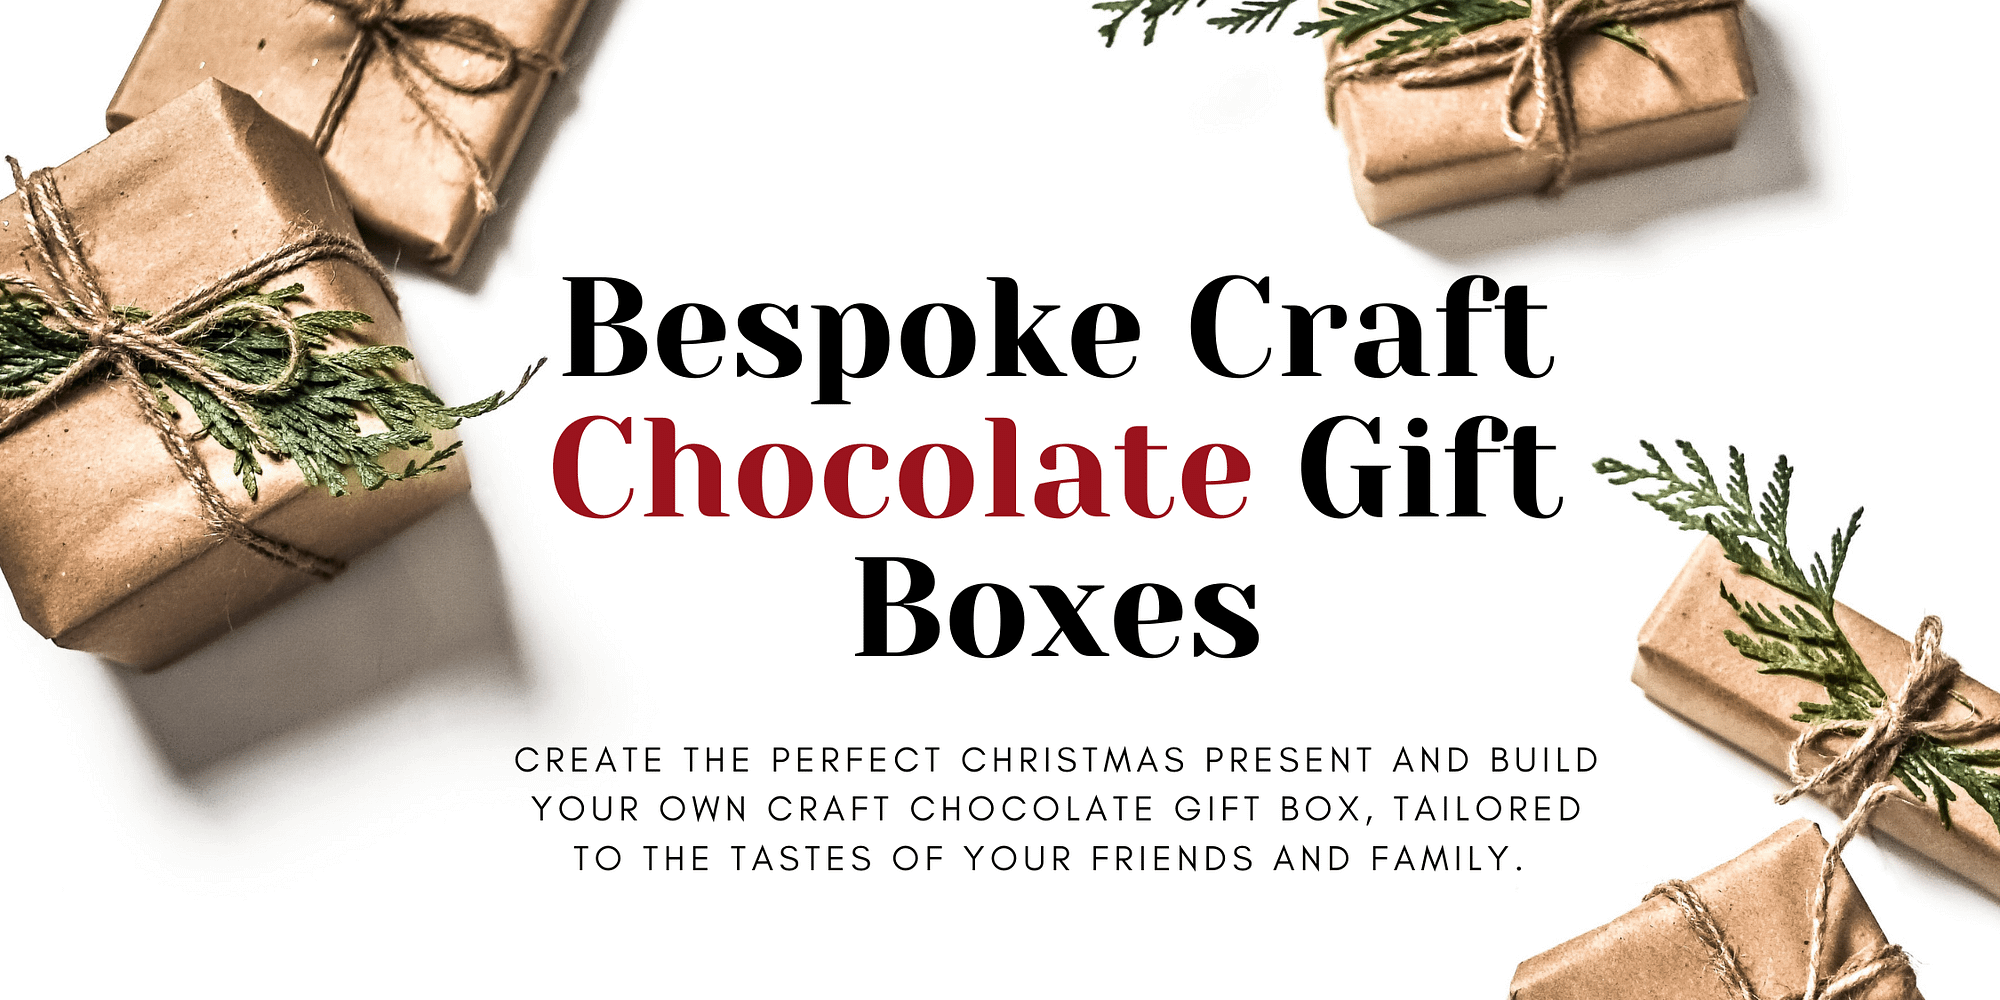 bespoke craft chocolate gift boxes banner